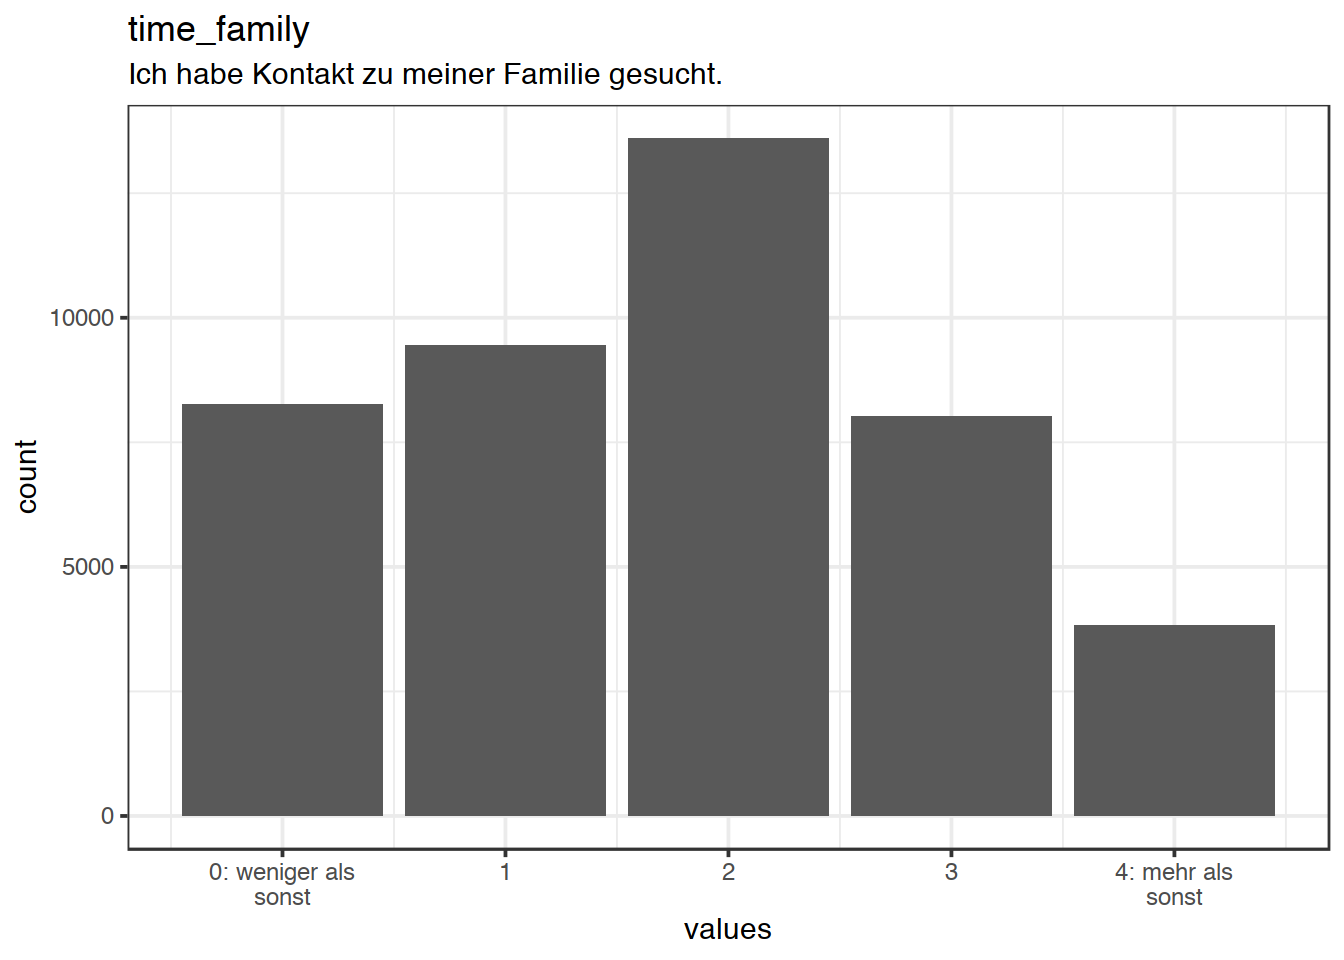 Distribution of values for time_family